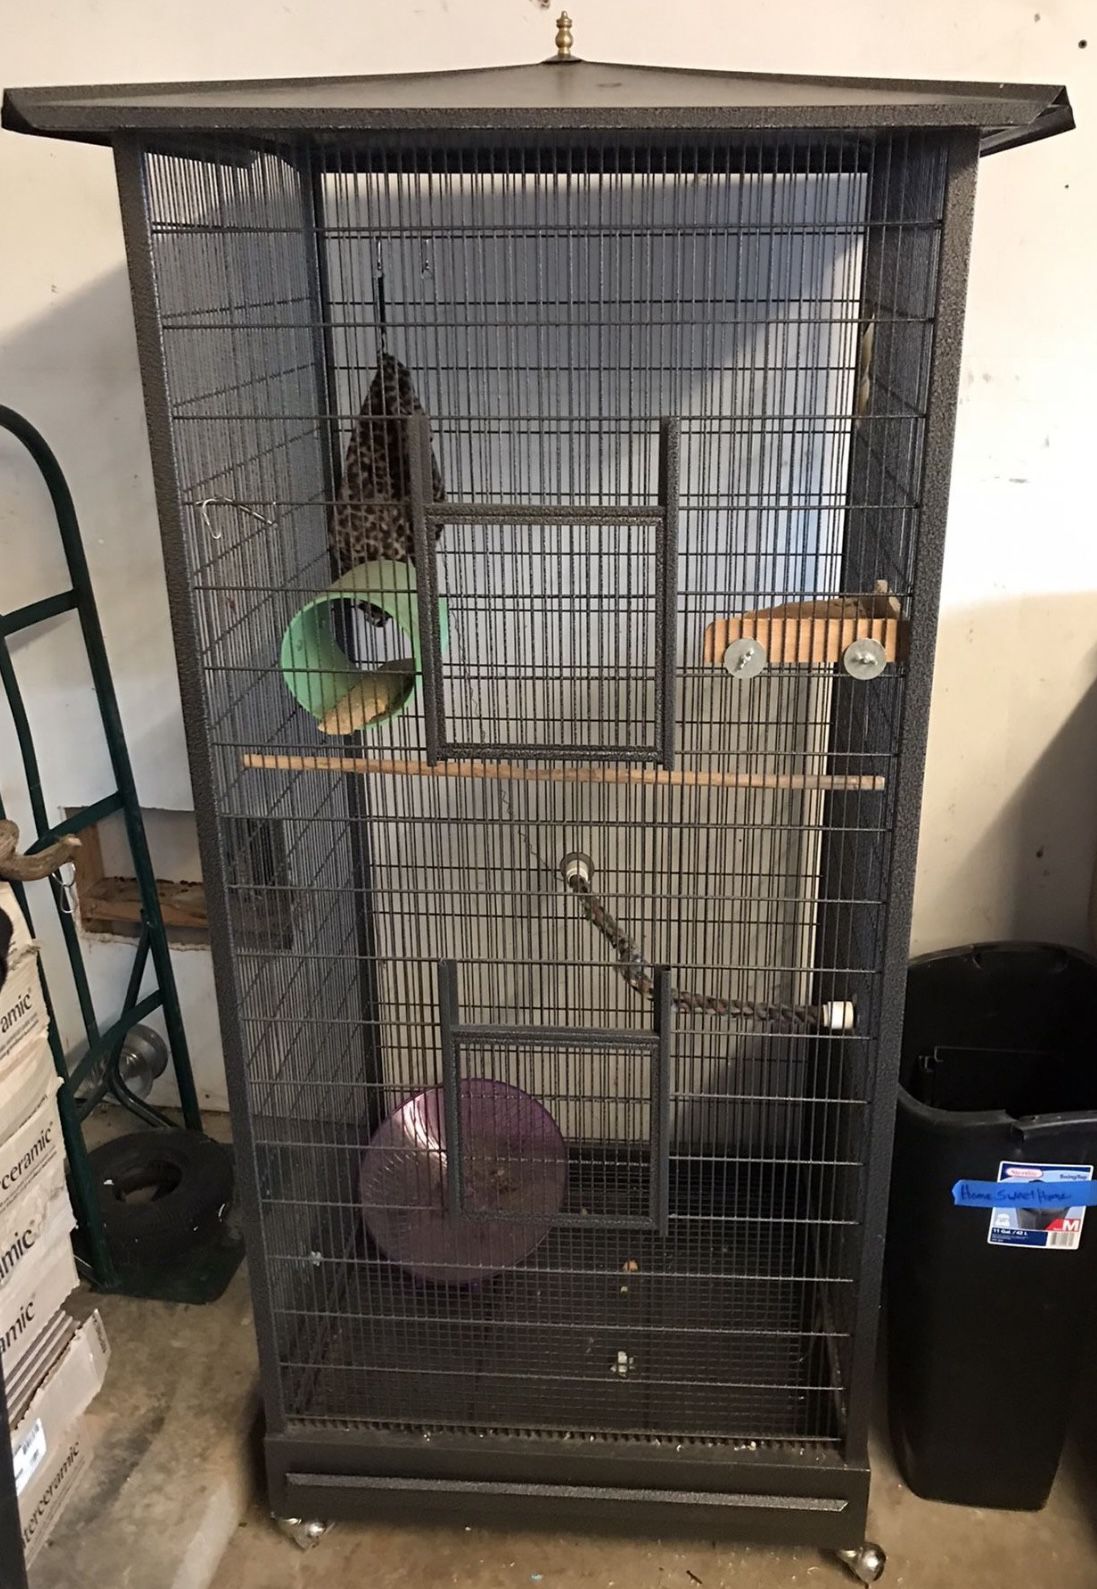 Over 5’ Tall Marsupial Cage